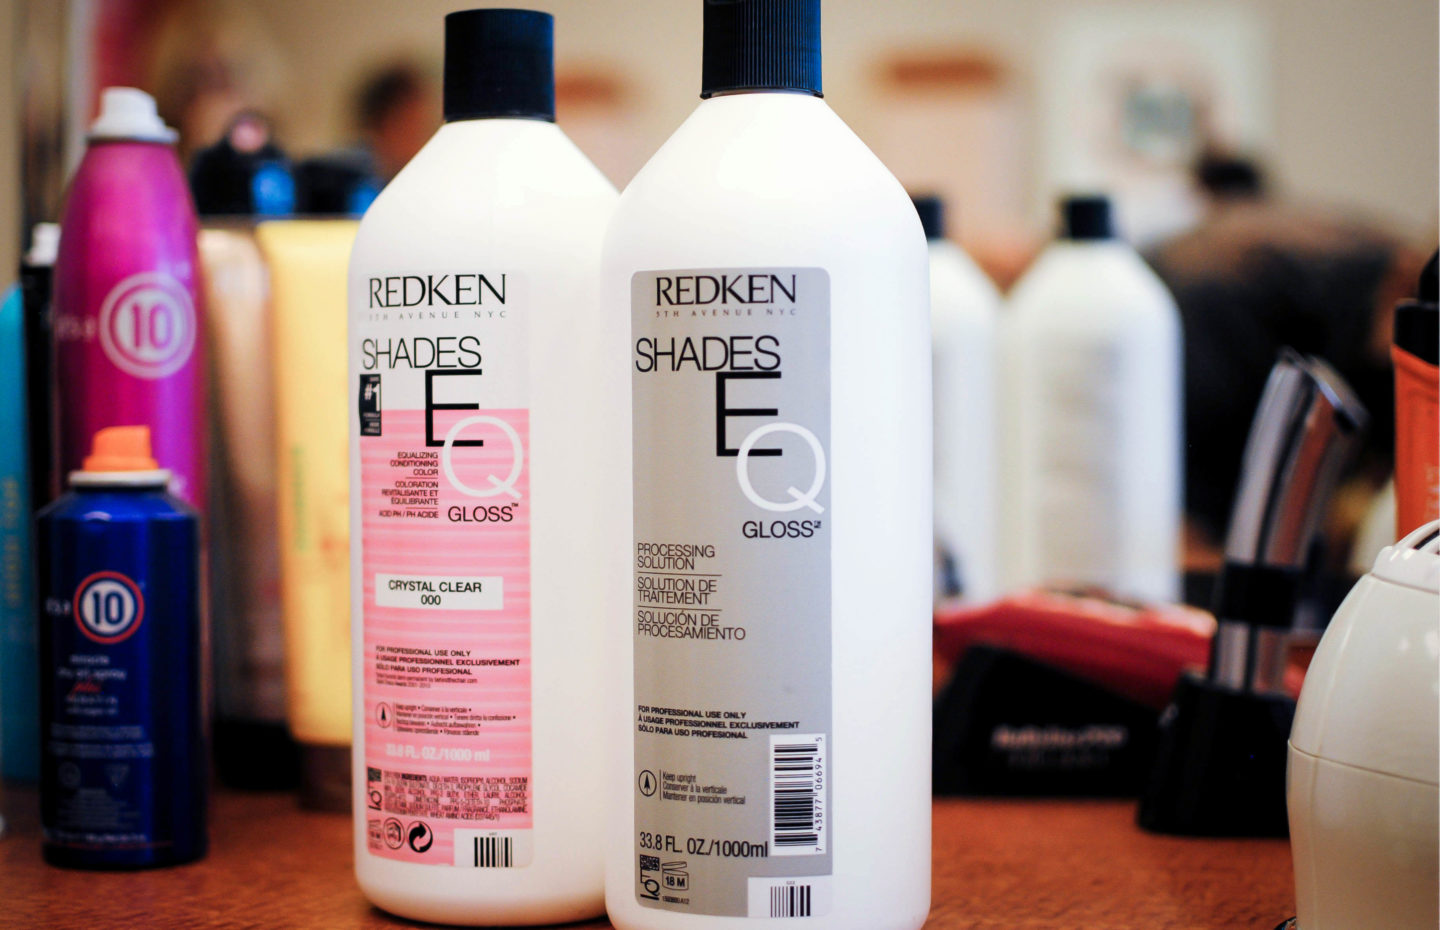 vanessa-lambert-blogger-behind-what-would-v-wear-shares-her-experiemce-at-hair-cuttery-getting-a-redken-gloss-it-up-treatment_23